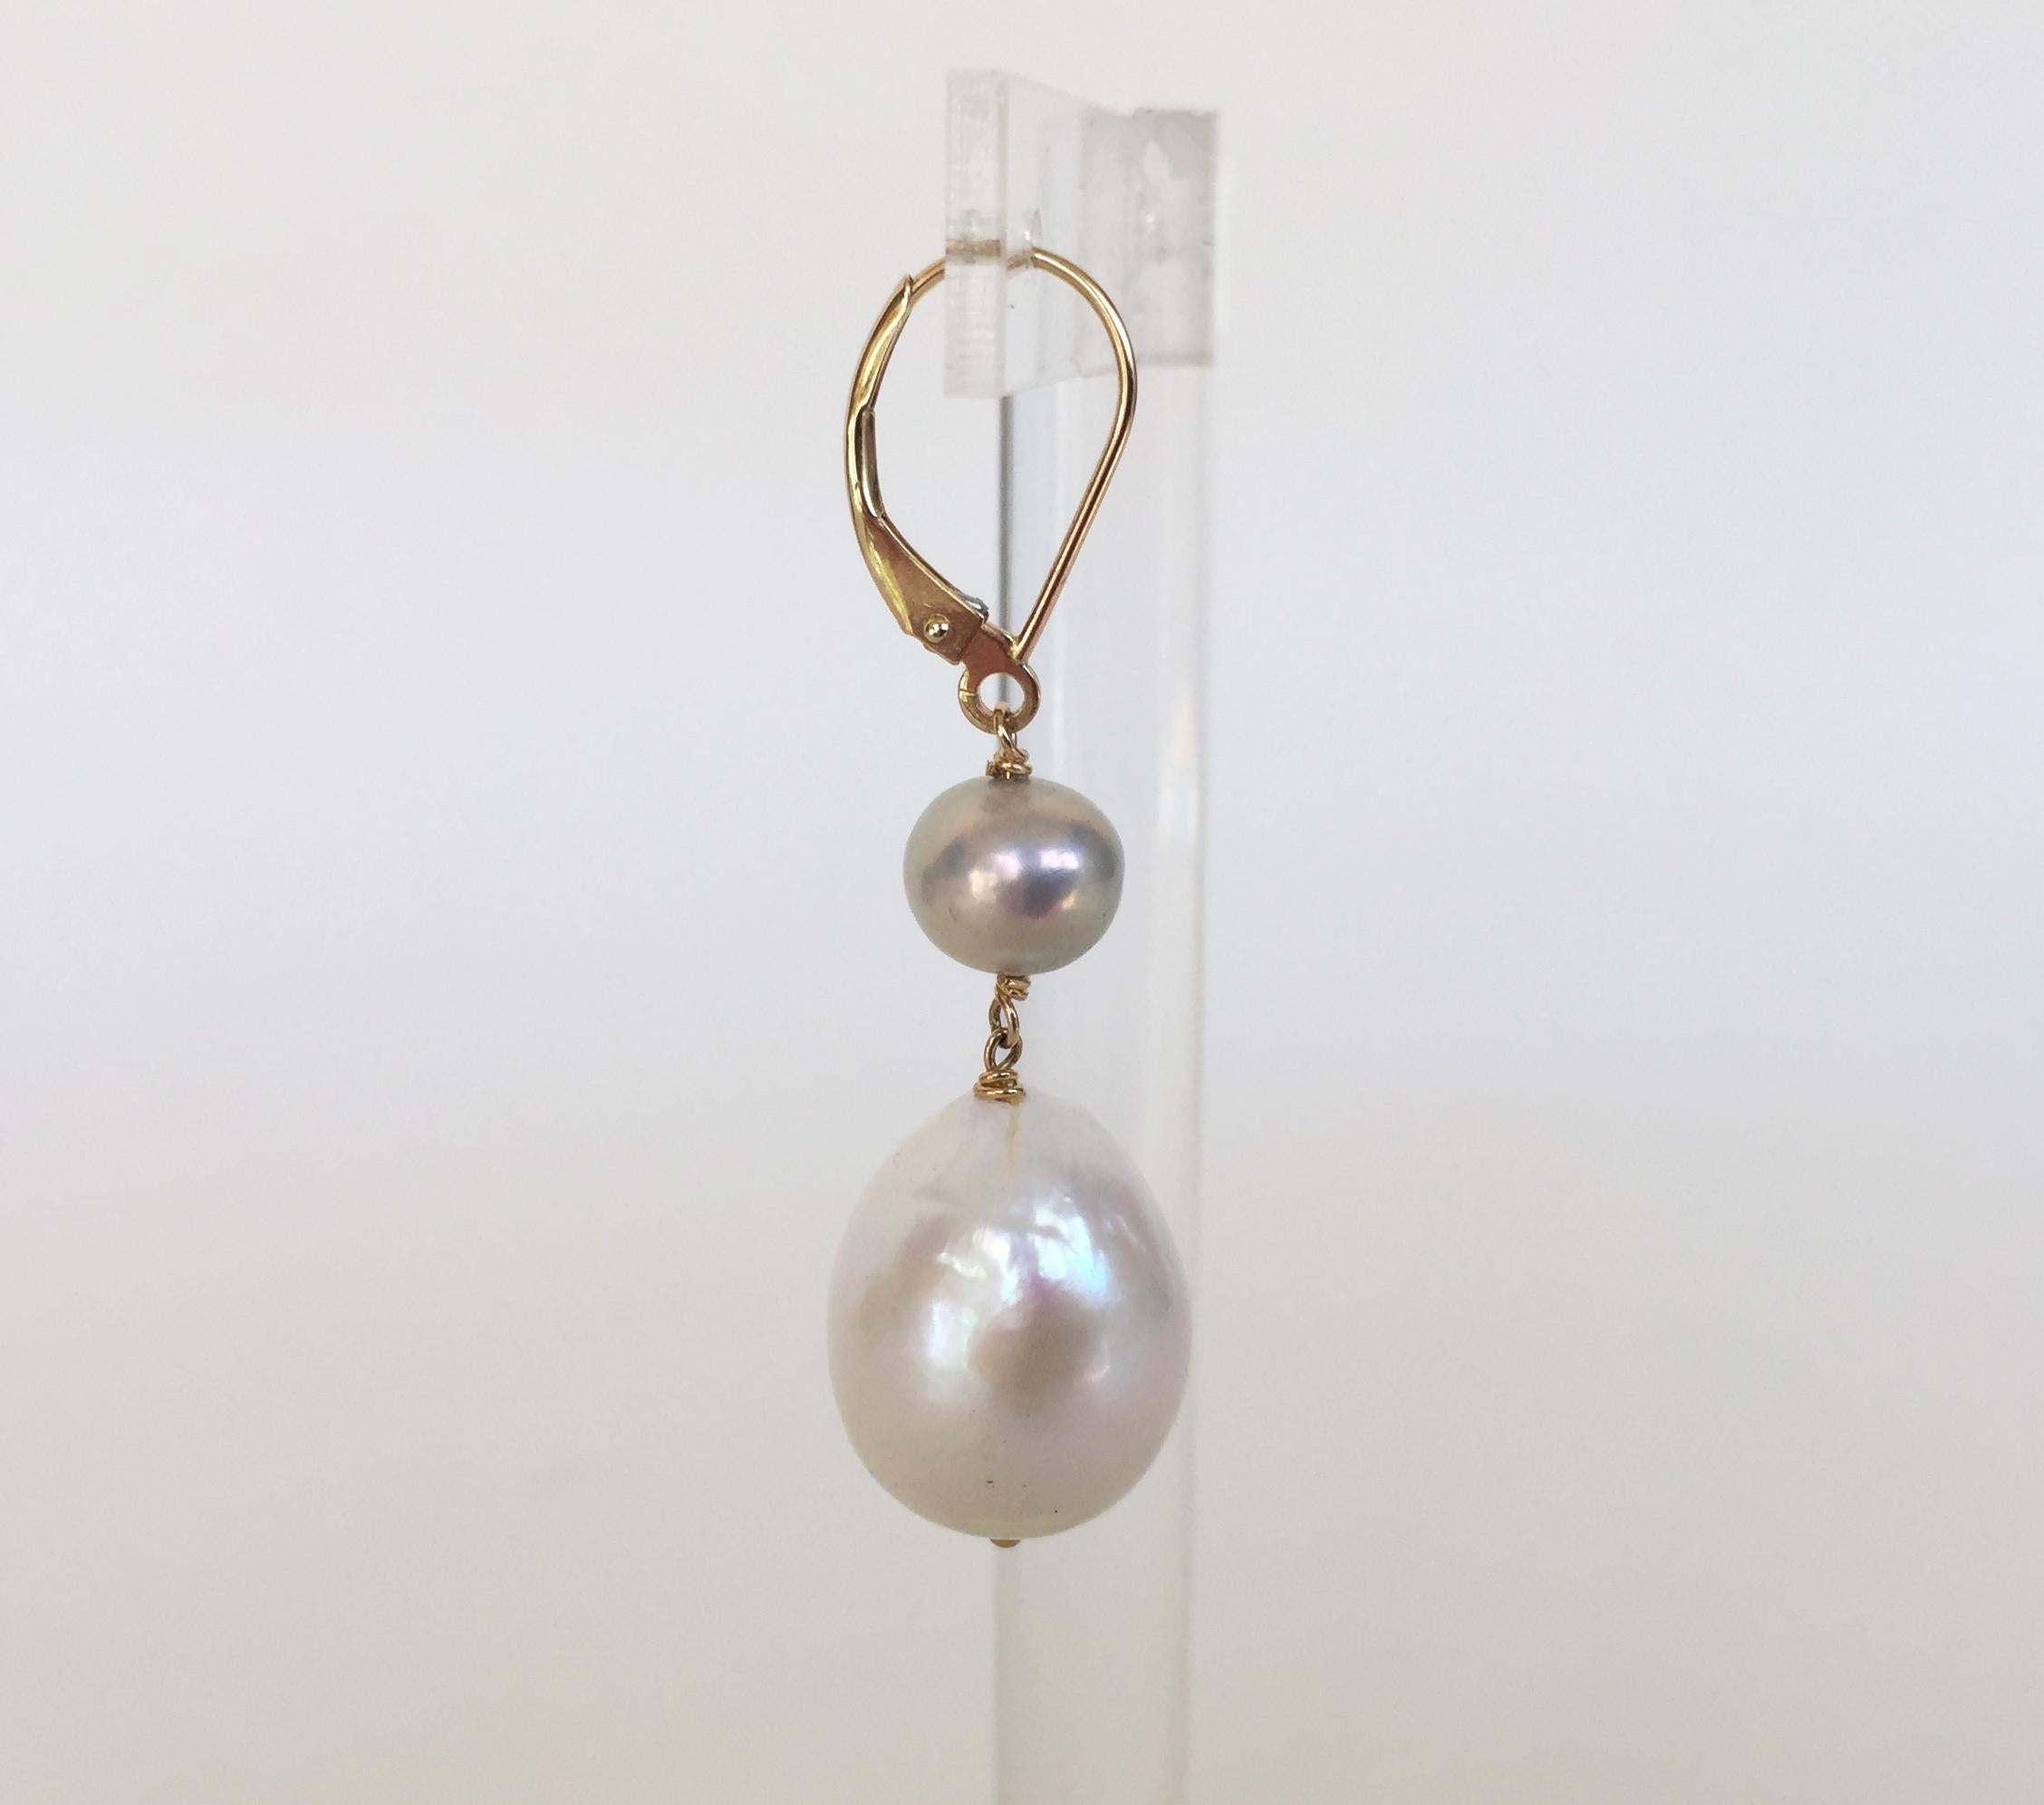 Artist Marina J White and Grey Pearl Drop Earrings with 14 K Yellow Gold Lever Backs